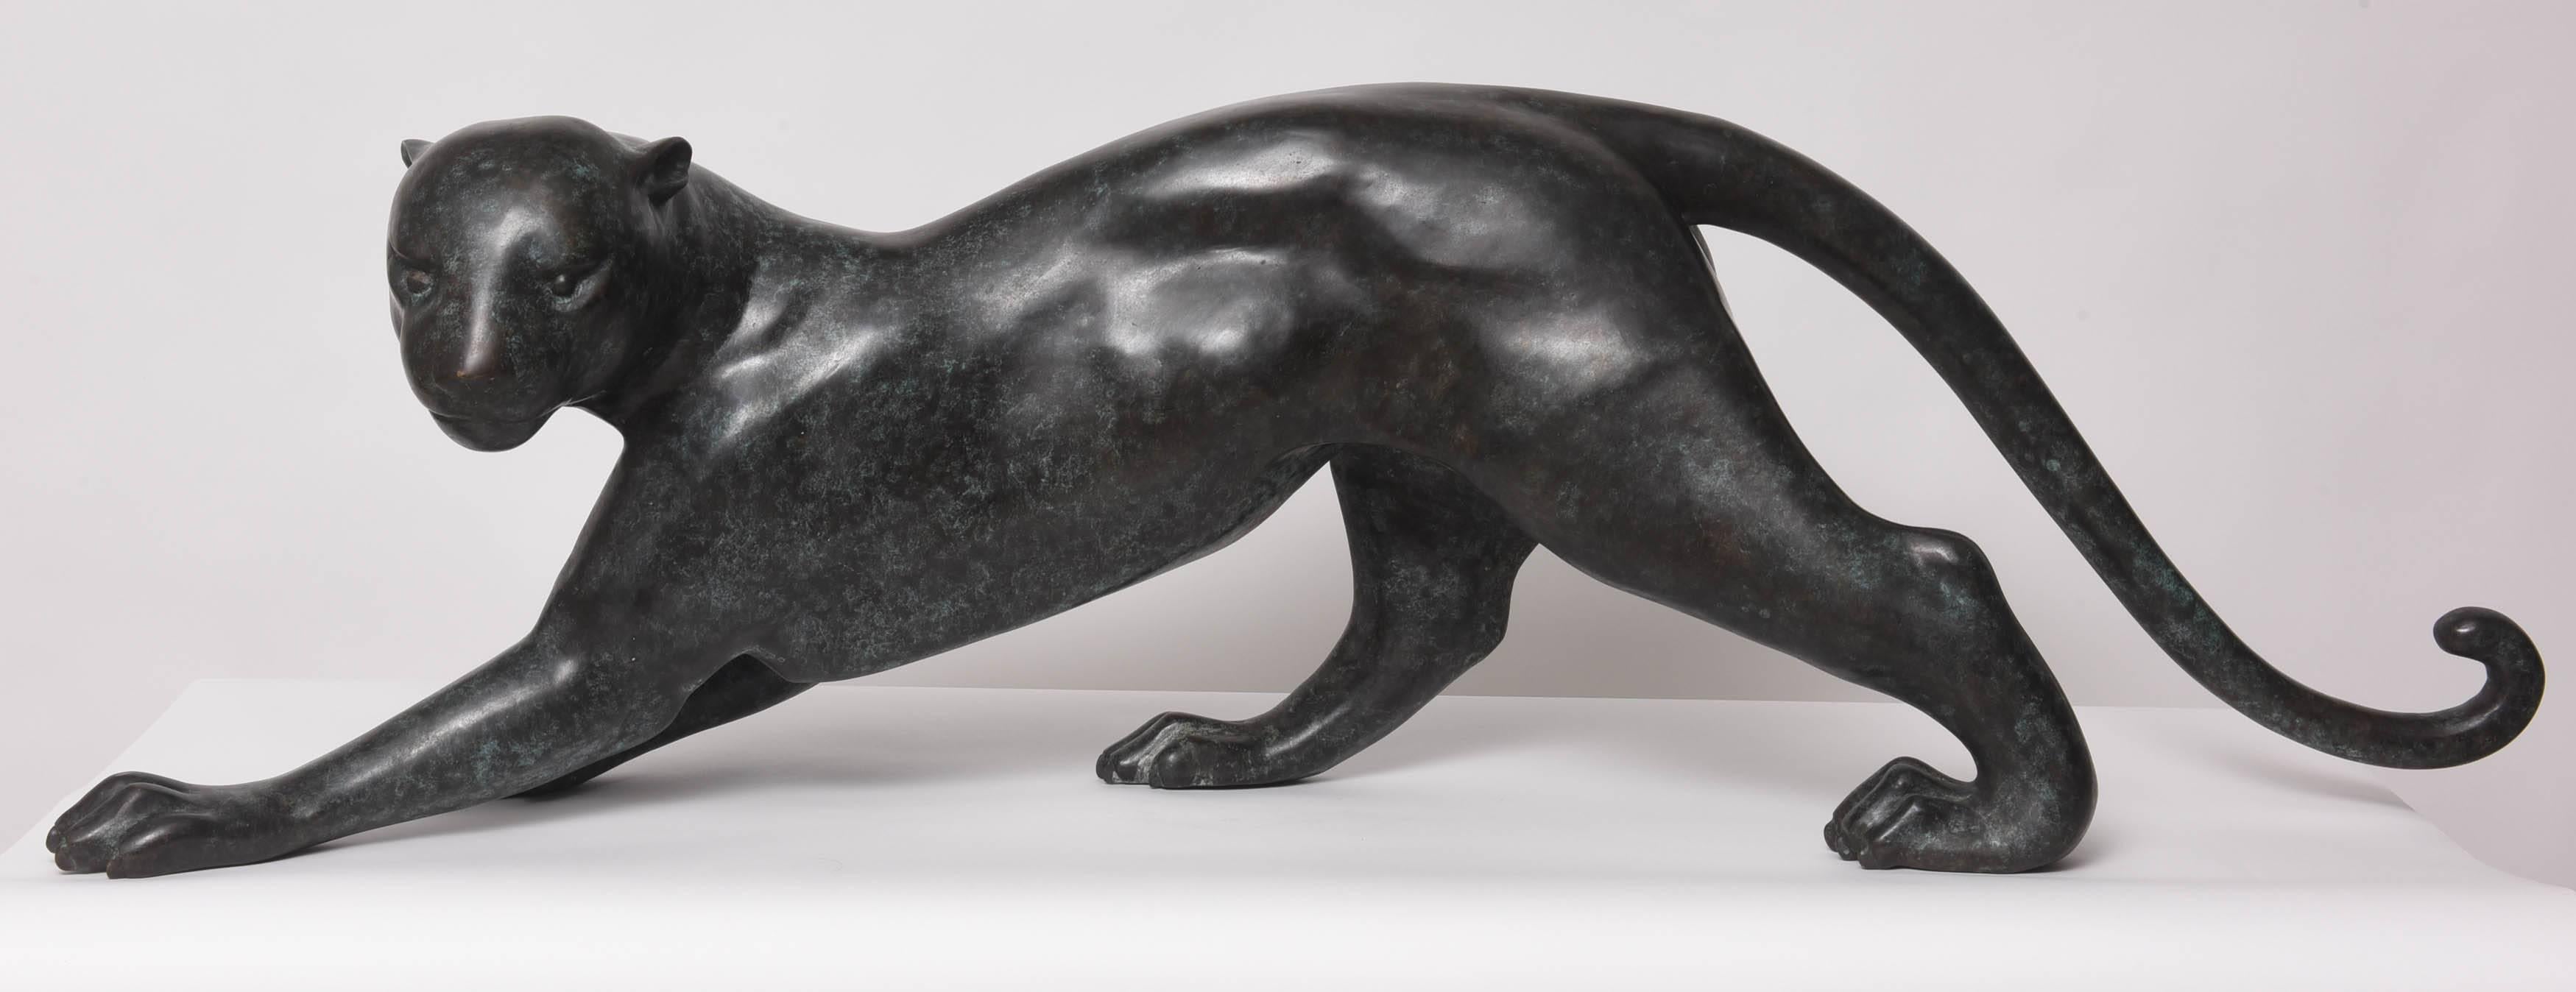 This monumental scaled bronze sculpture of a Florida panther is very much in the style of the American sculptor Wheeler Williams. They have a sleek Art Deco quality and will make the perfect addition to your garden.

The coloration is a